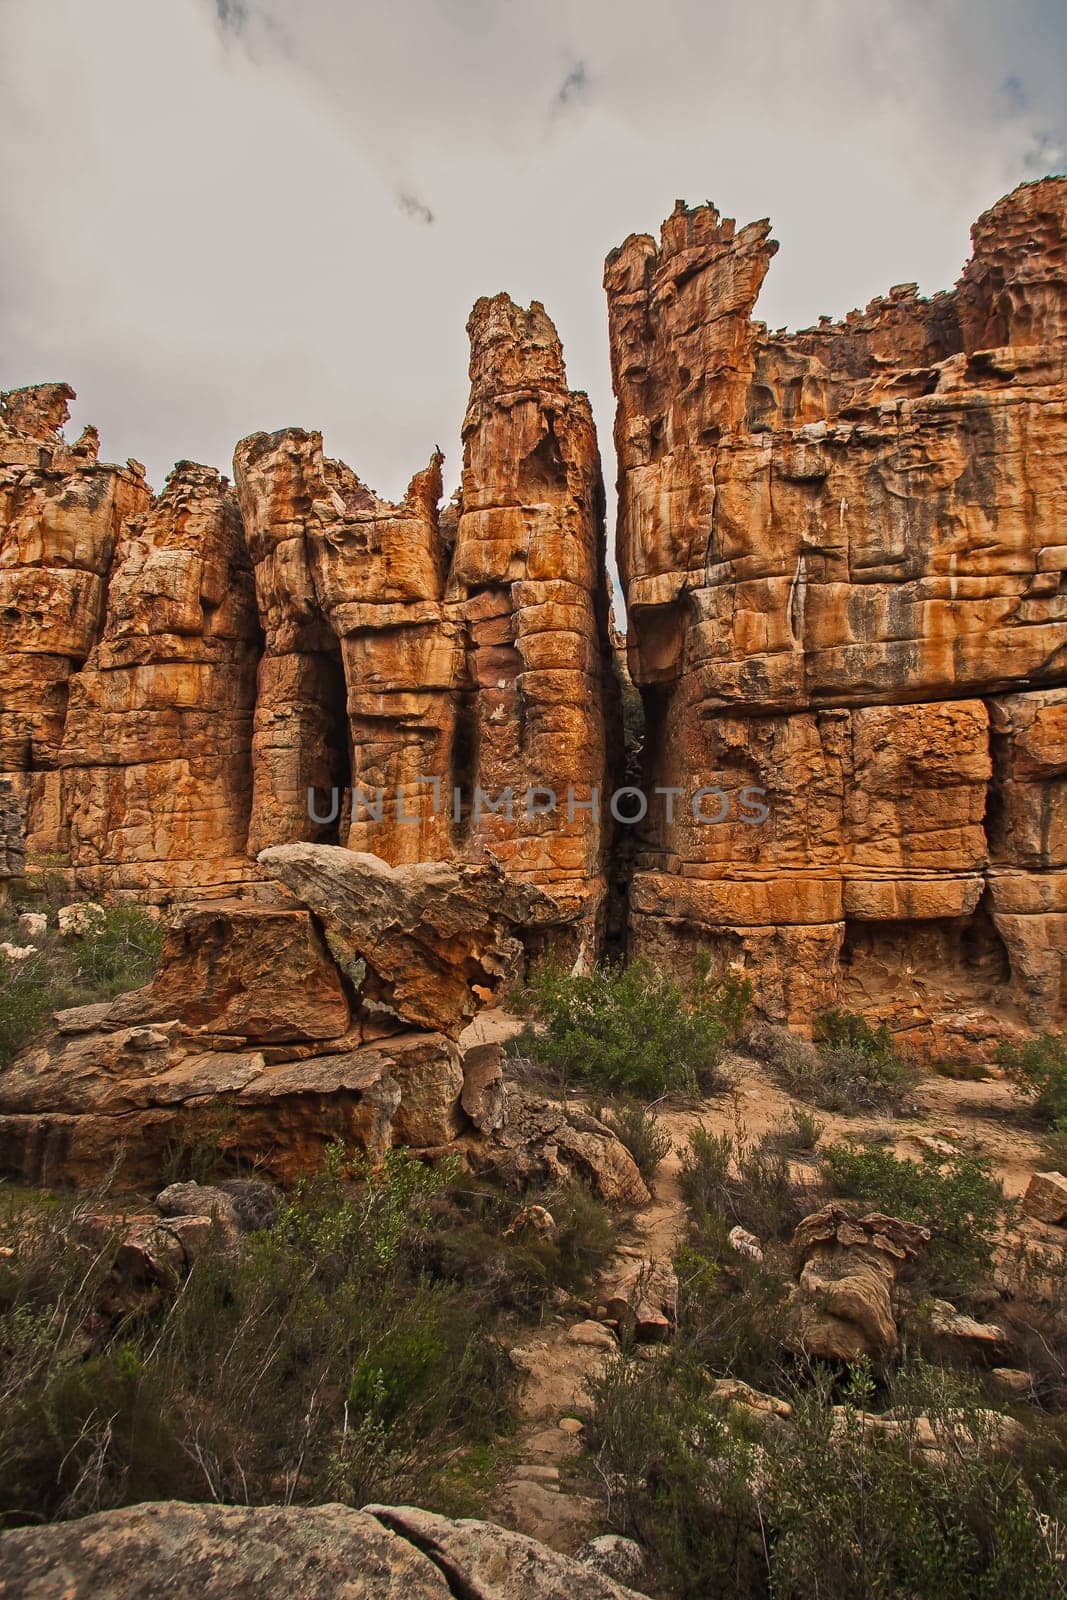 Cederberg Rock Formations 12903 by kobus_peche